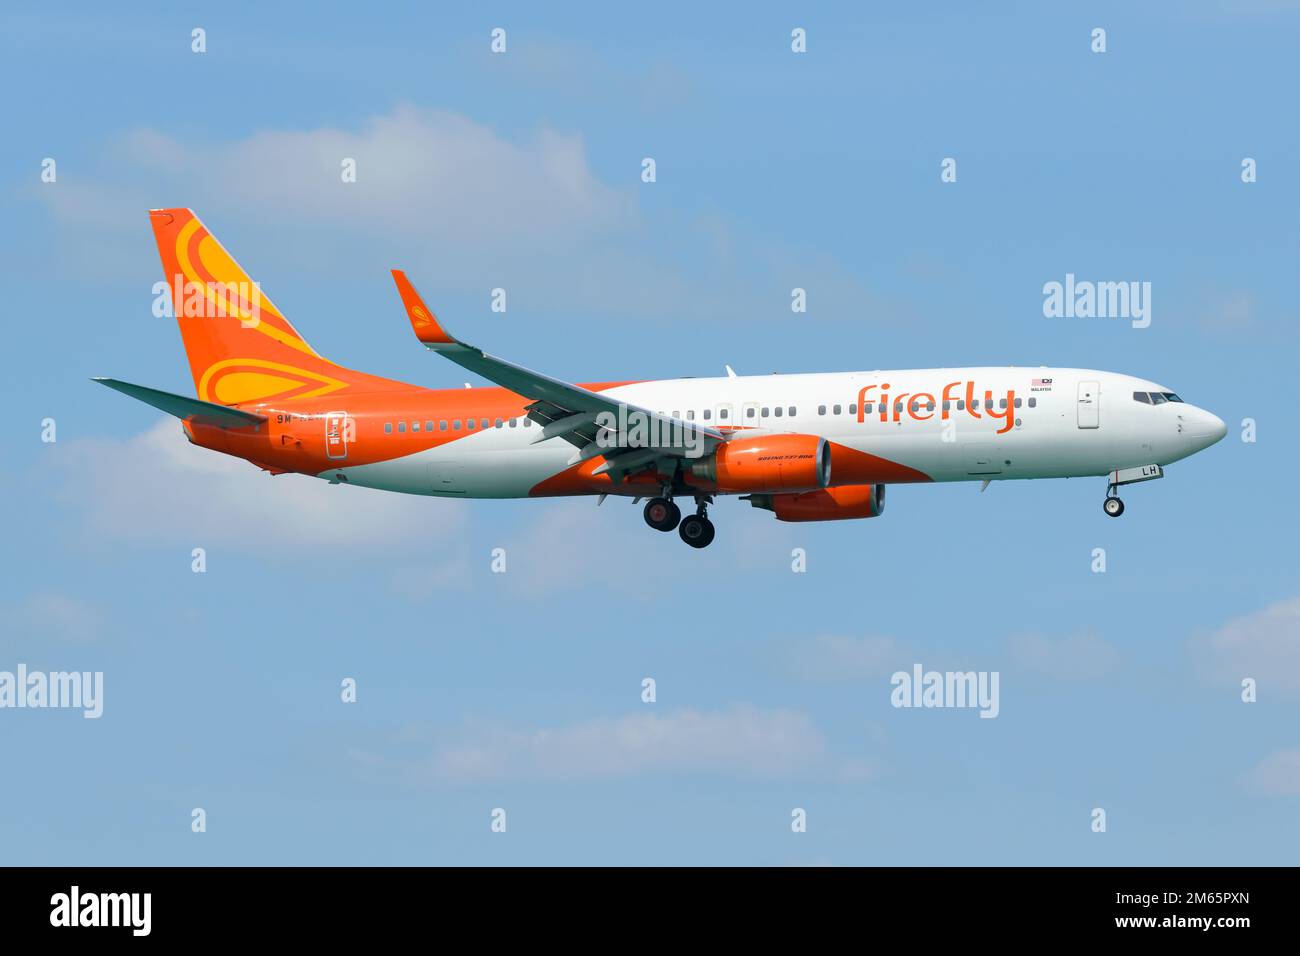 Firefly airline Boeing 737 aircraft flying. Airplane 737-800 of Firefly airline, also know as Fire Fly Airlines. Stock Photo